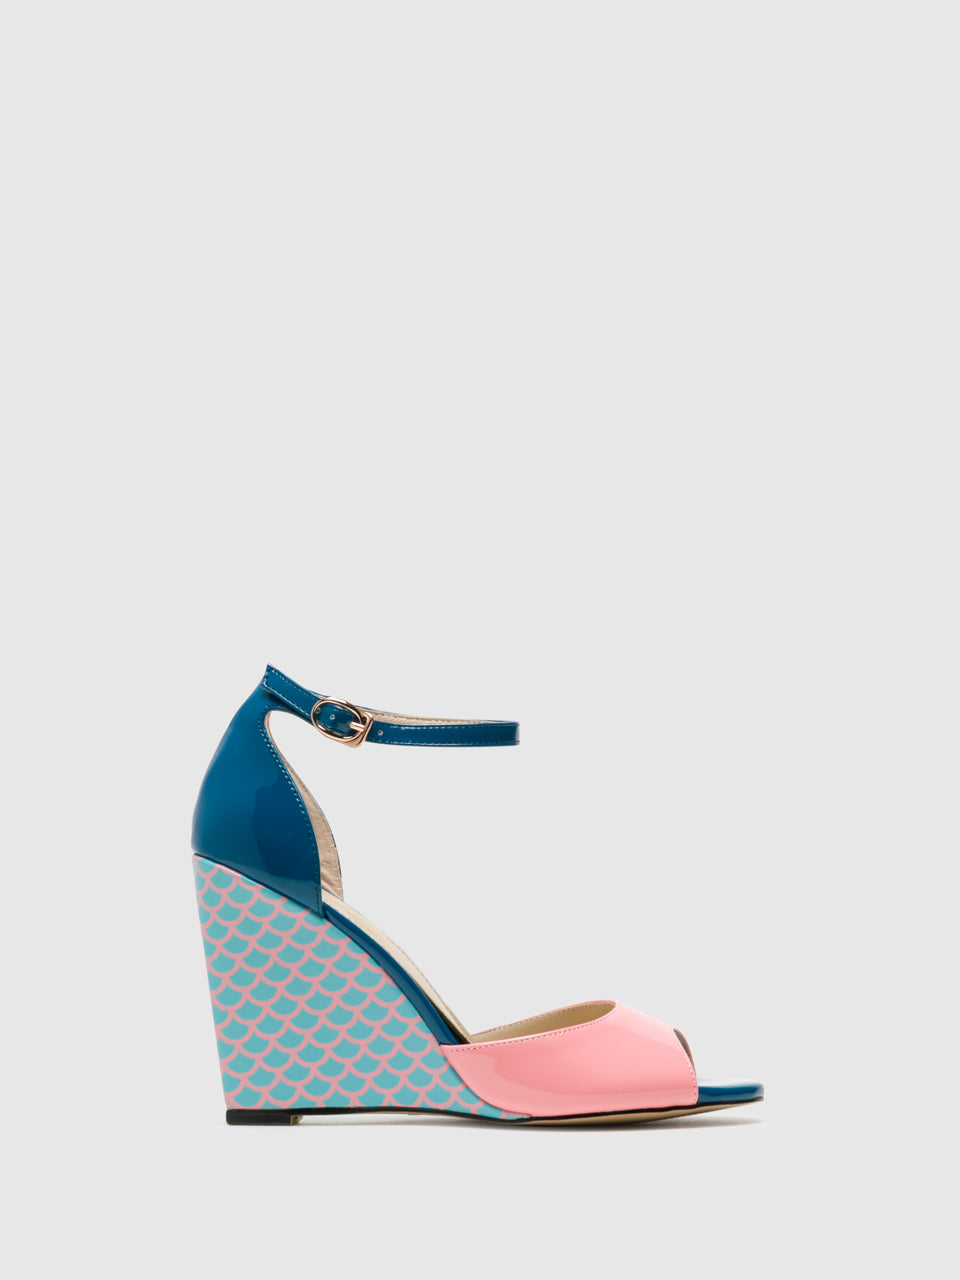 Yull Multicolor Wedge Sandals